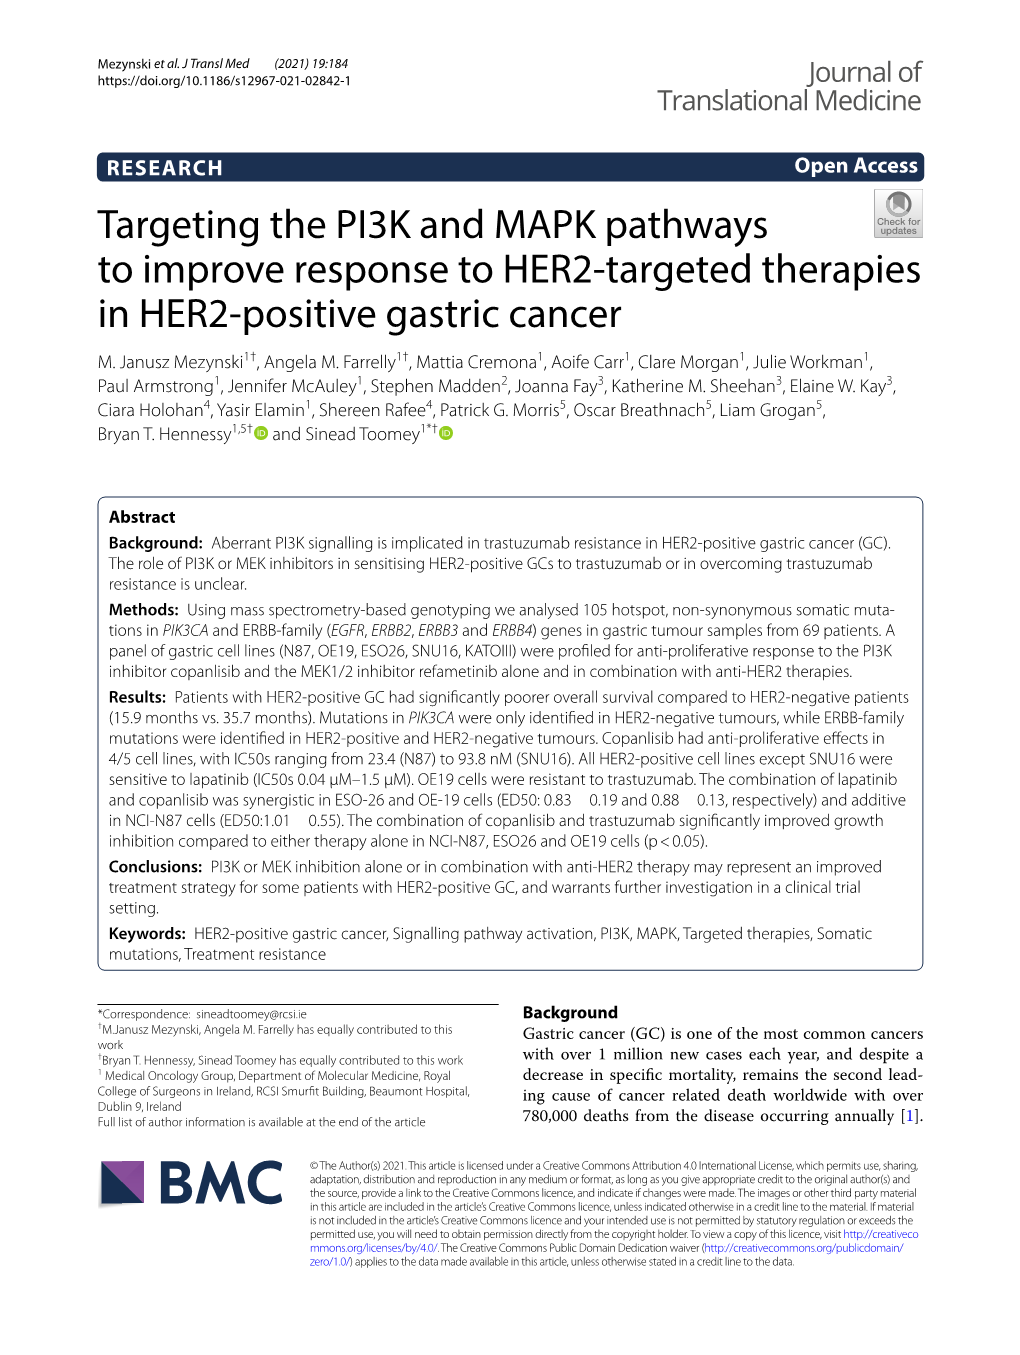 Targeting the PI3K and MAPK Pathways to Improve Response to HER2‑Targeted Therapies in HER2‑Positive Gastric Cancer M